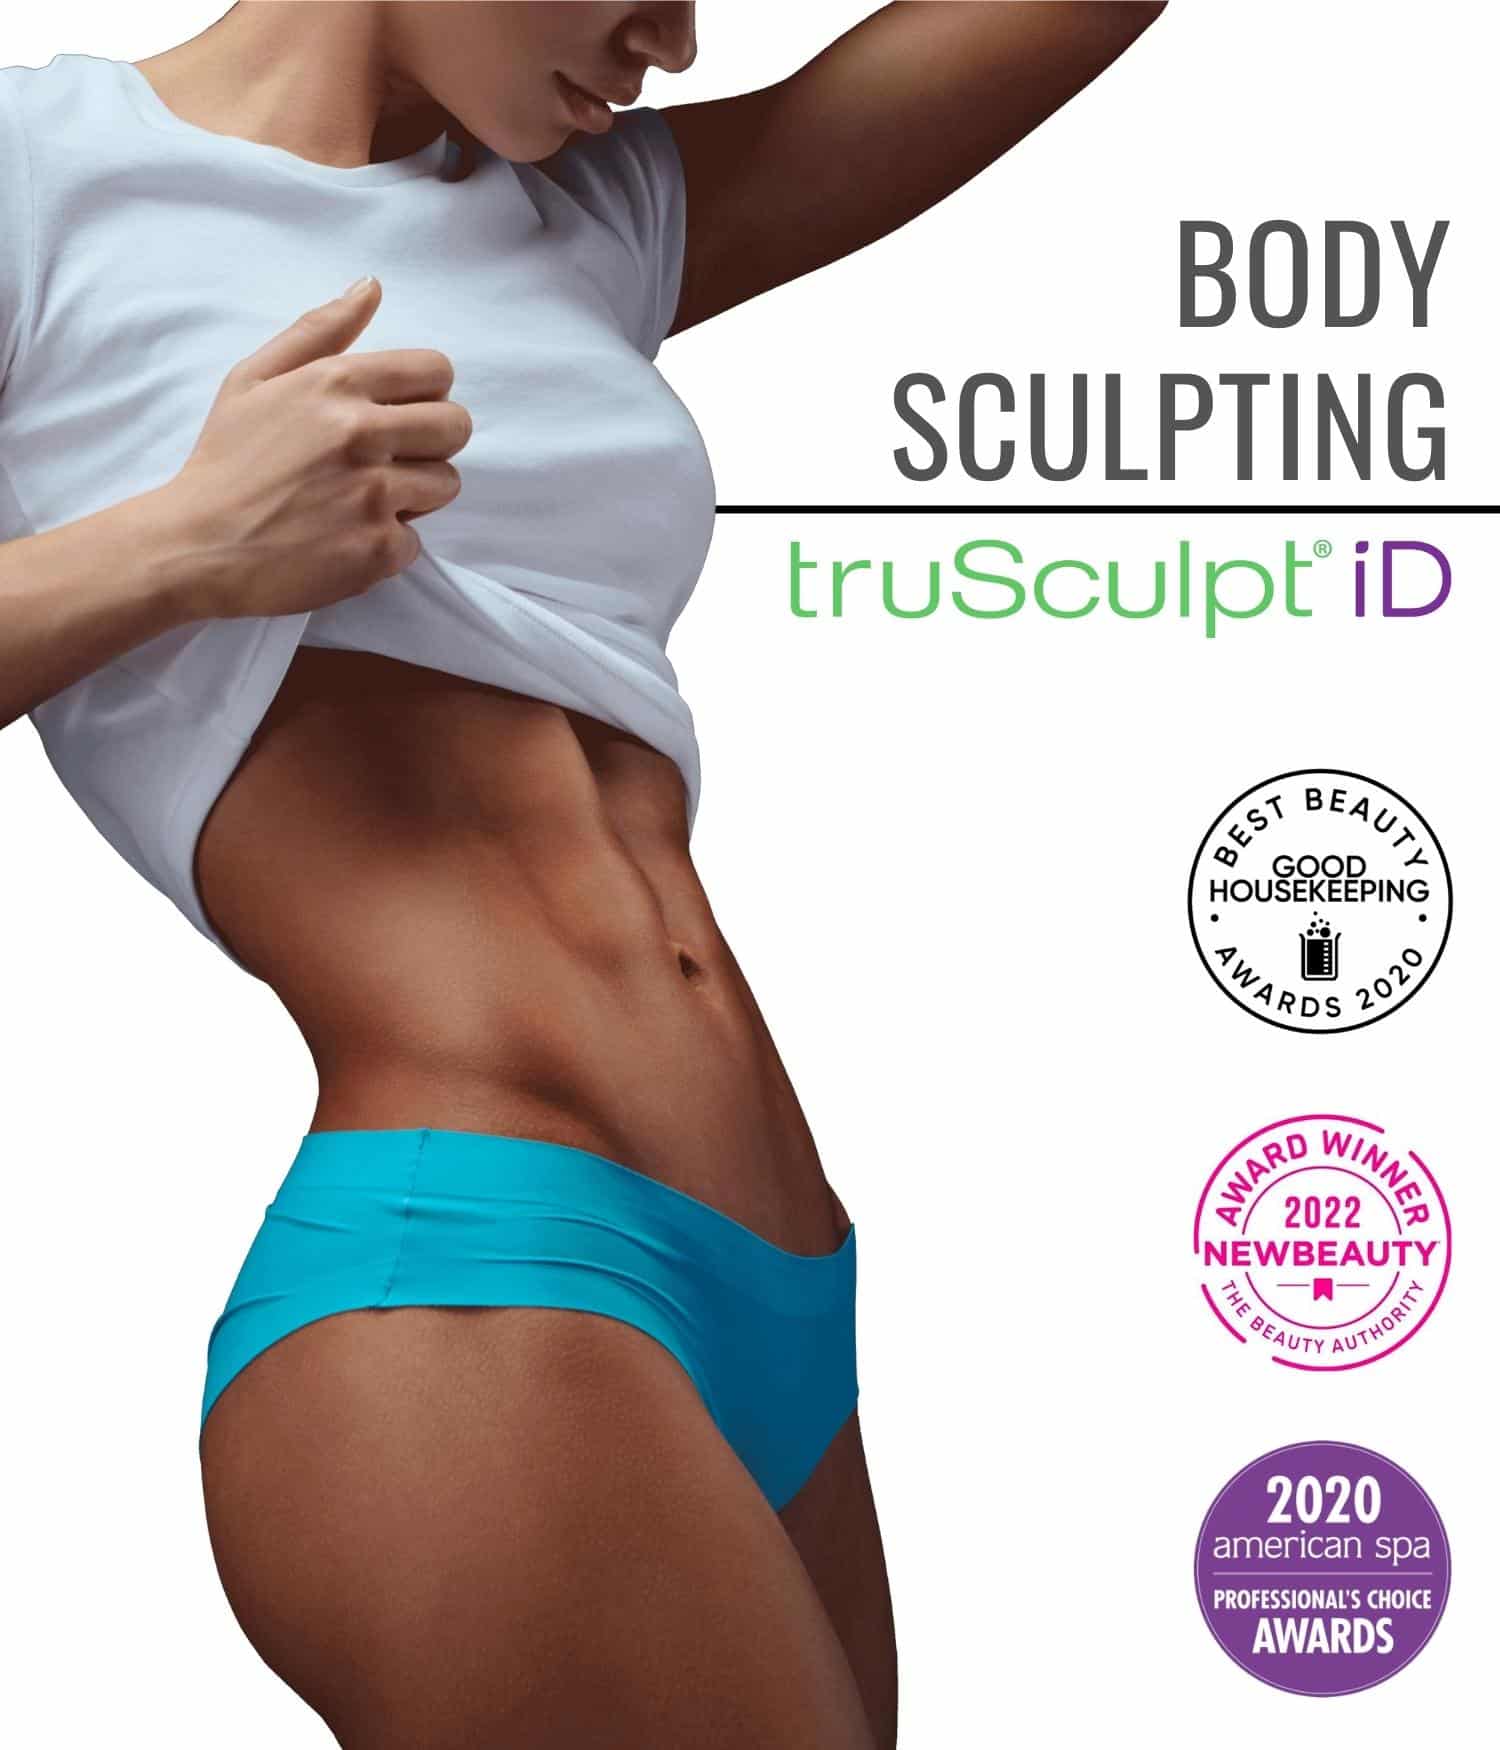 Fitness woman with her flat belly promoting TruSculpt iD